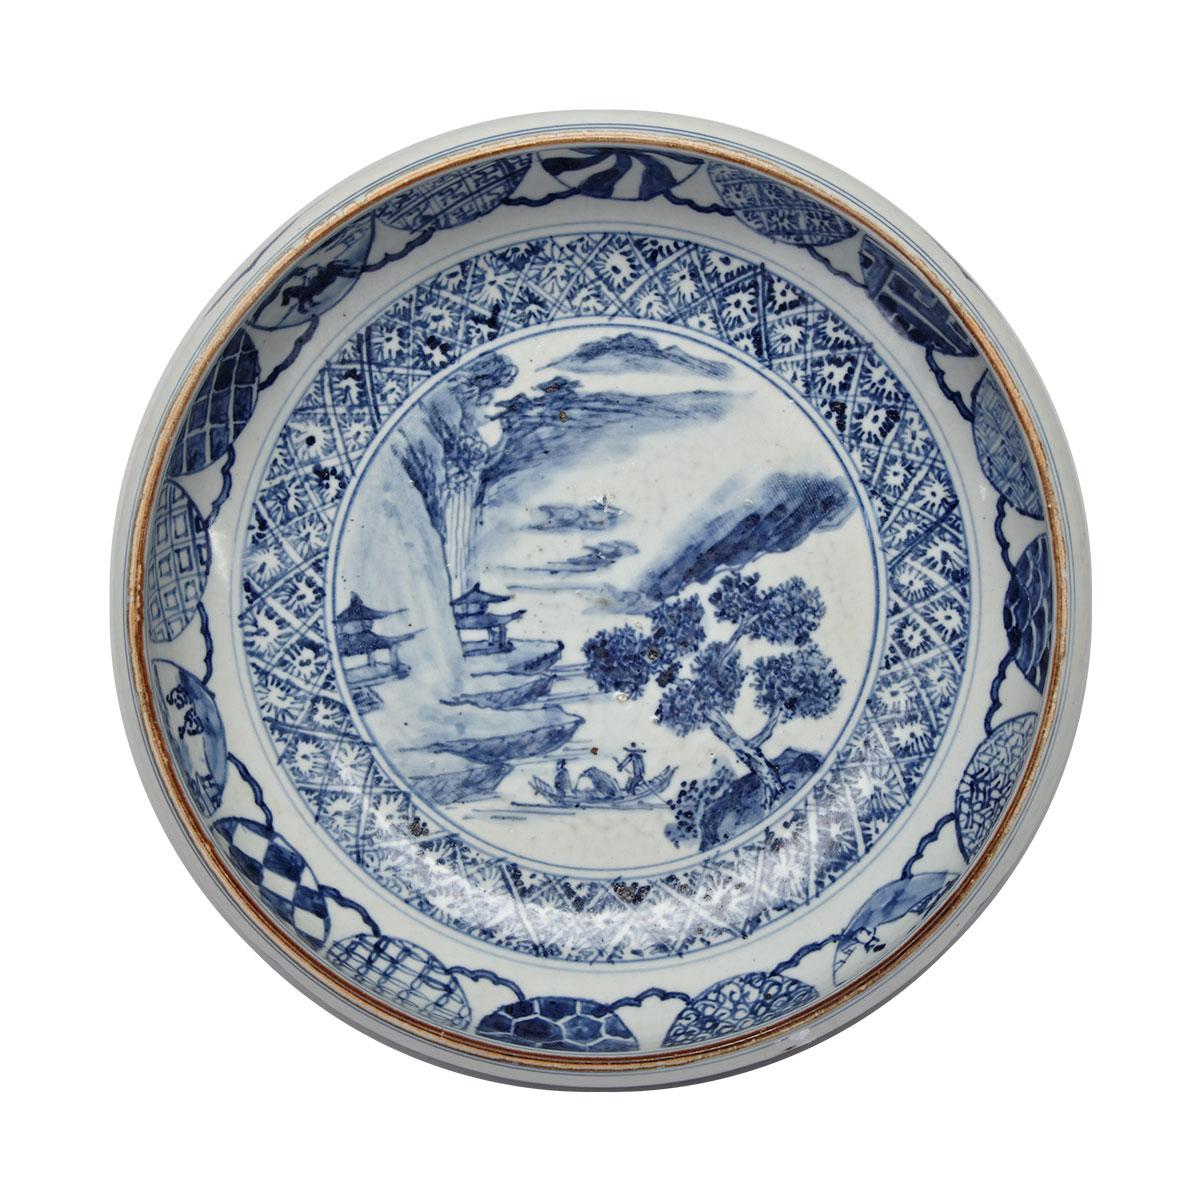 Blue and White Landscape Bowl, 19th Century